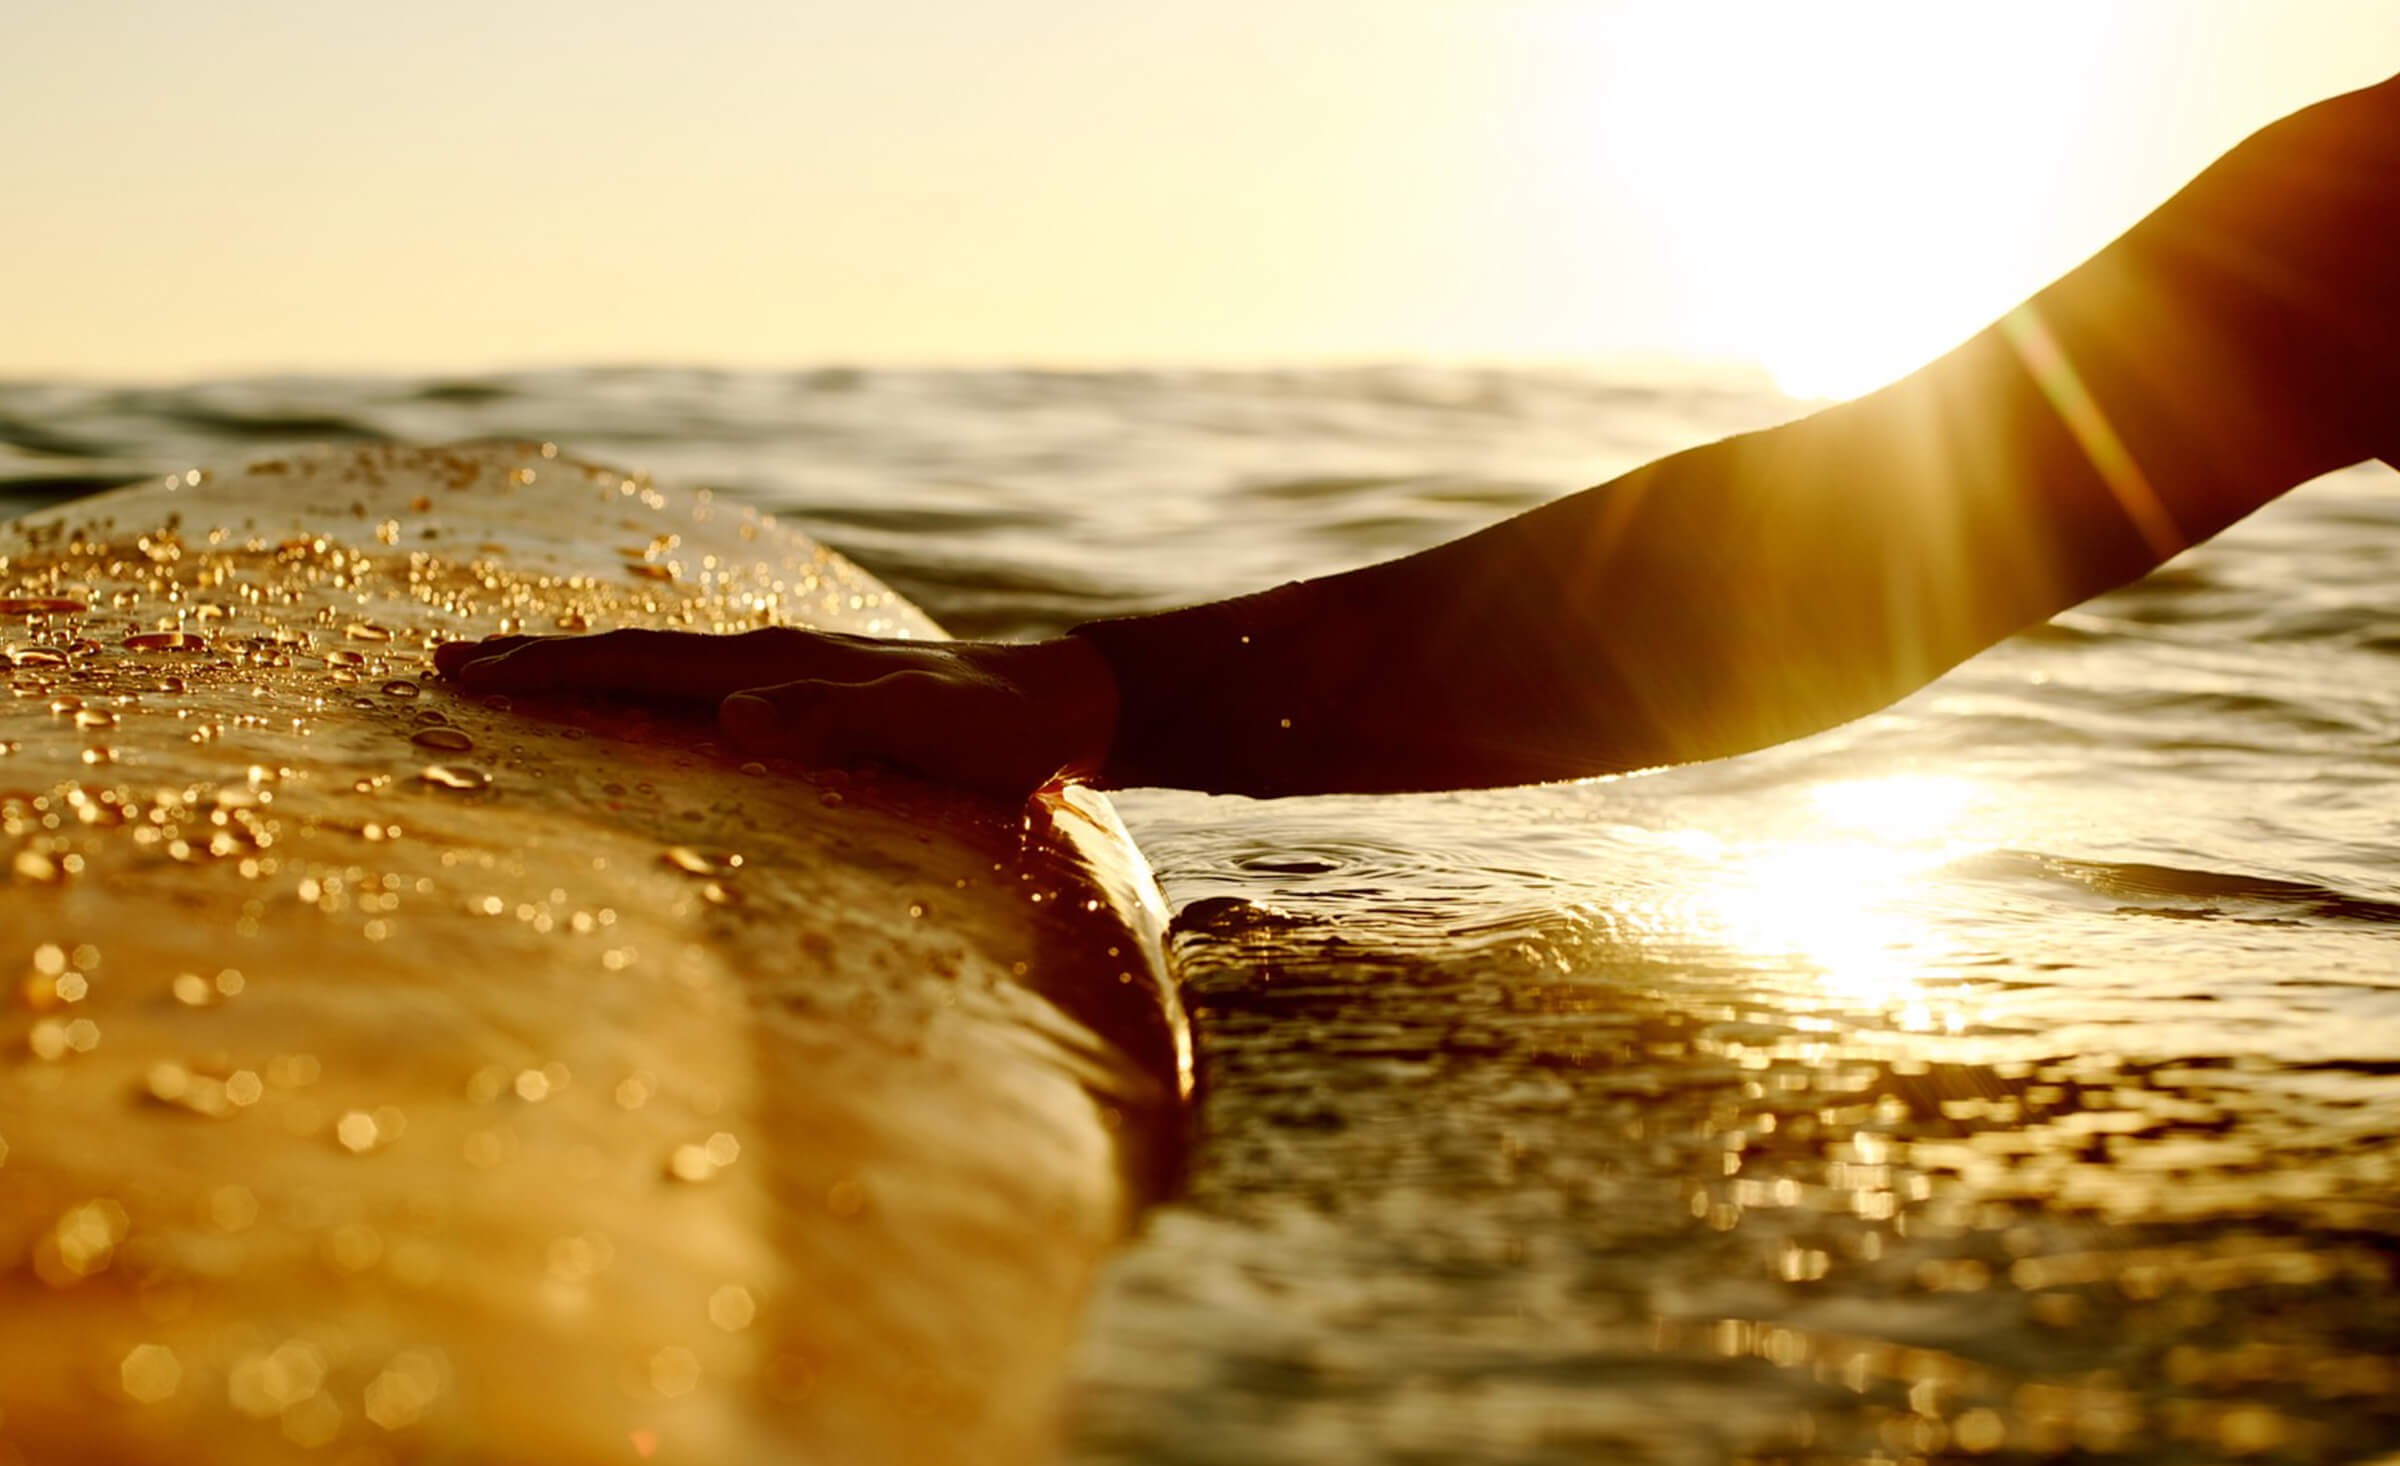 Hand reaches out and touches surfboard in the ocean water with the sun rising in the background.